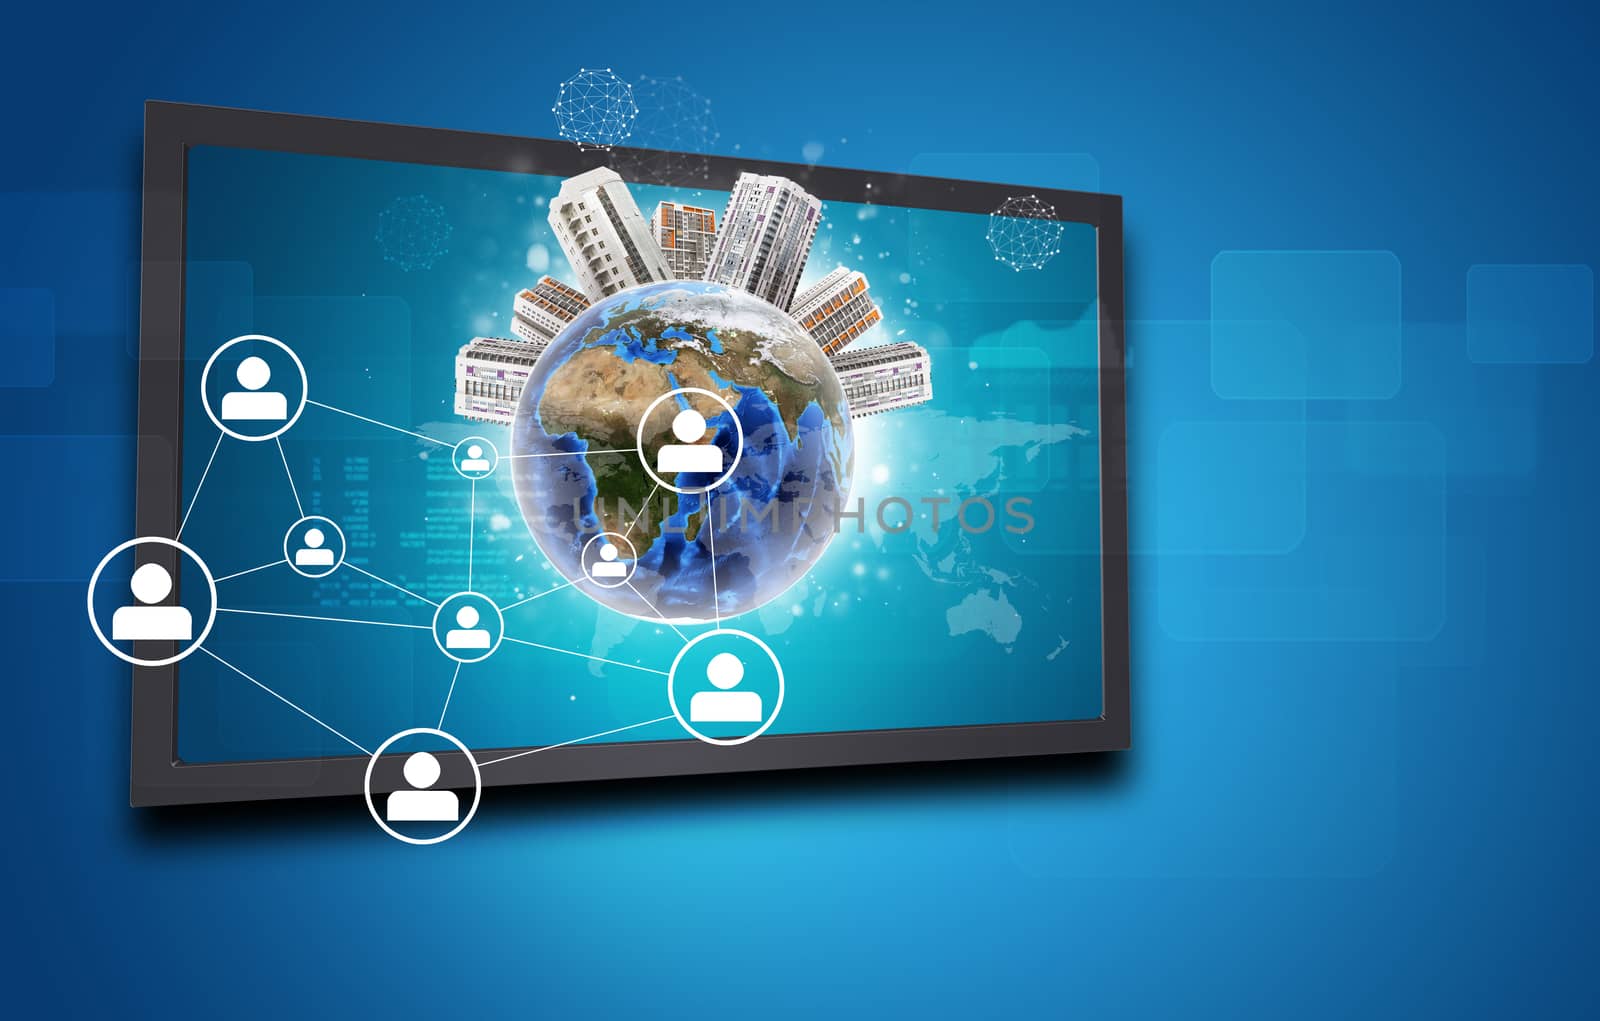 Touchscreen display and Globe with buildings on top, network of person icons and other elements, on blue background. Element of this image furnished by NASA